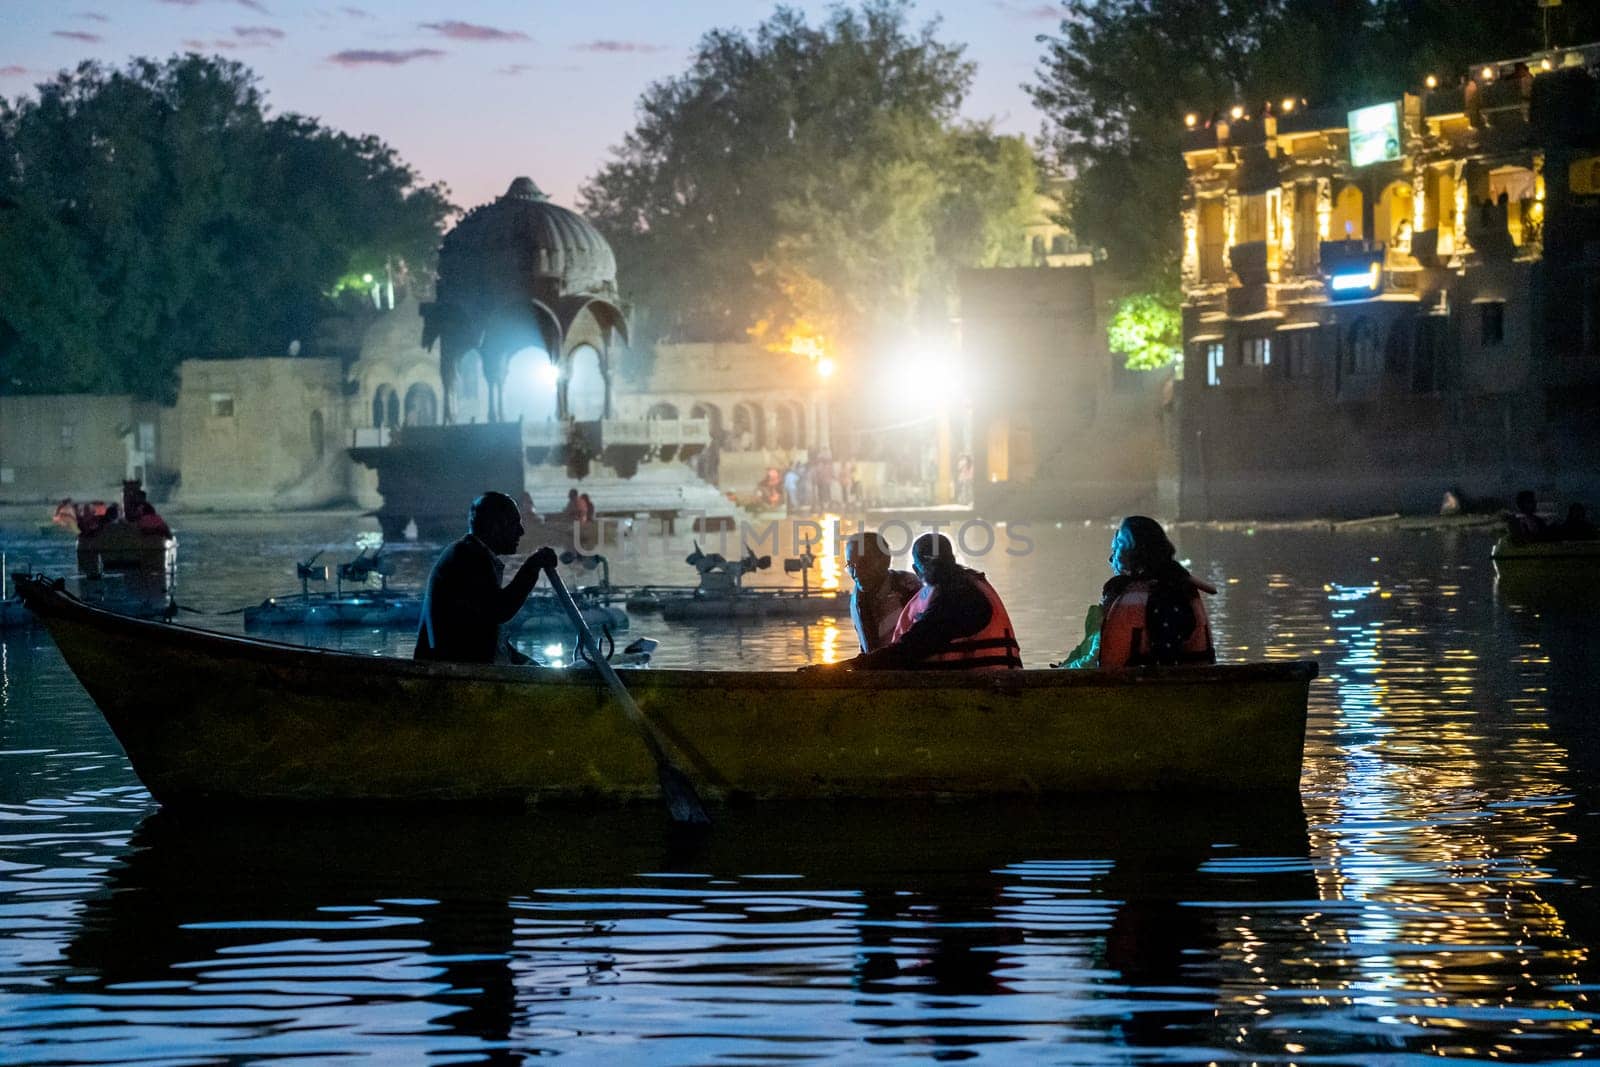 Family enjoying a night boat ride on the lit waters of Gadisar lake in Jaisalmer Jodhpur with the scenic palace and domes nearby a popular tourist destination India